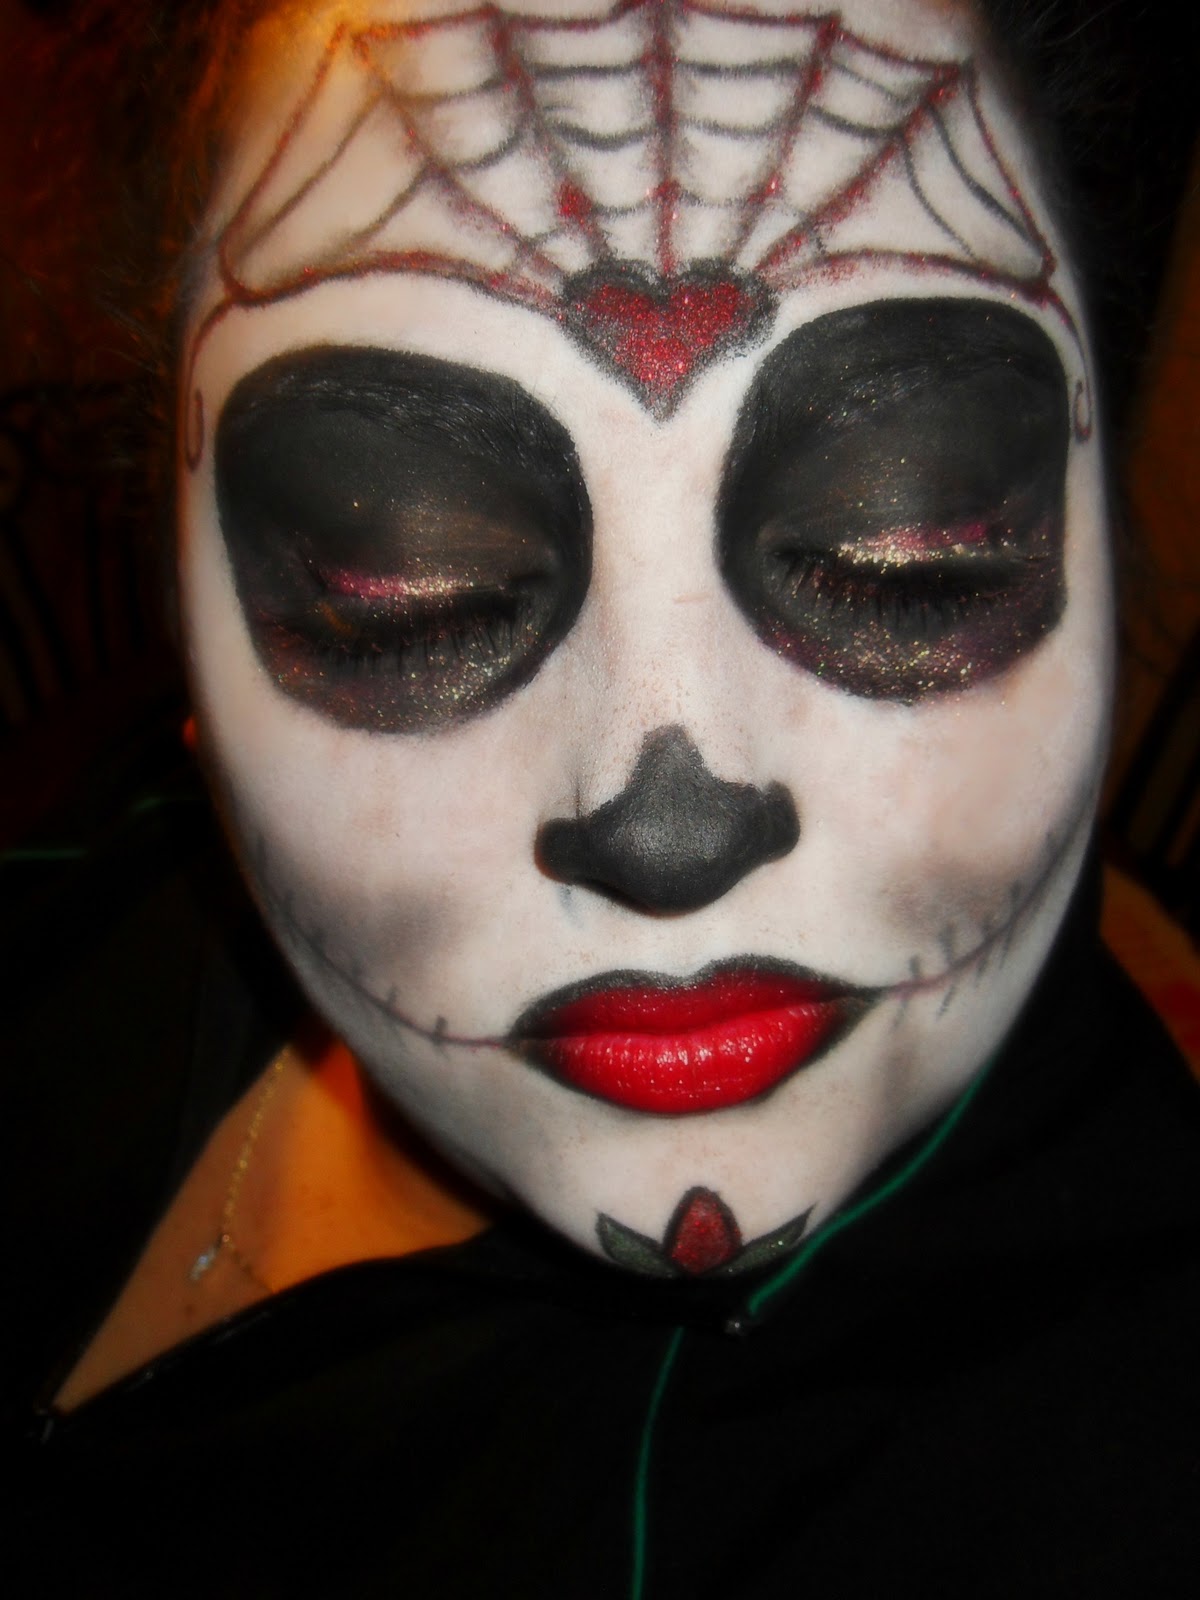 A LiTTLE OF THiS - A LiTTLE OF THAT: Sugar Skull :]